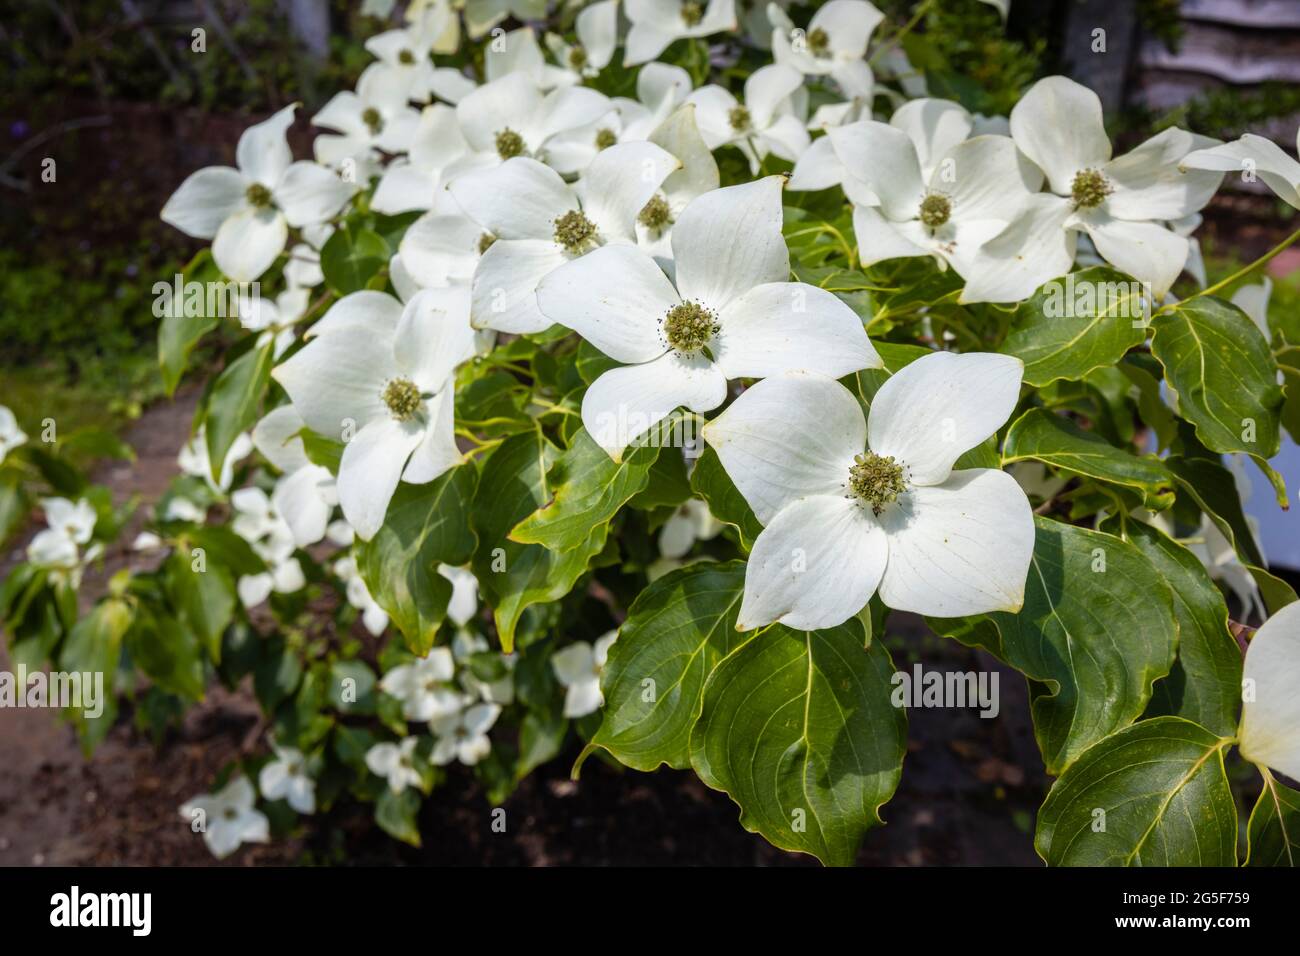 White to cream bracts of cornus kousa var chinensis 'China Girl', a flowering Chinese dogwood tree, an ornamental plant growing in a Surrey garden Stock Photo